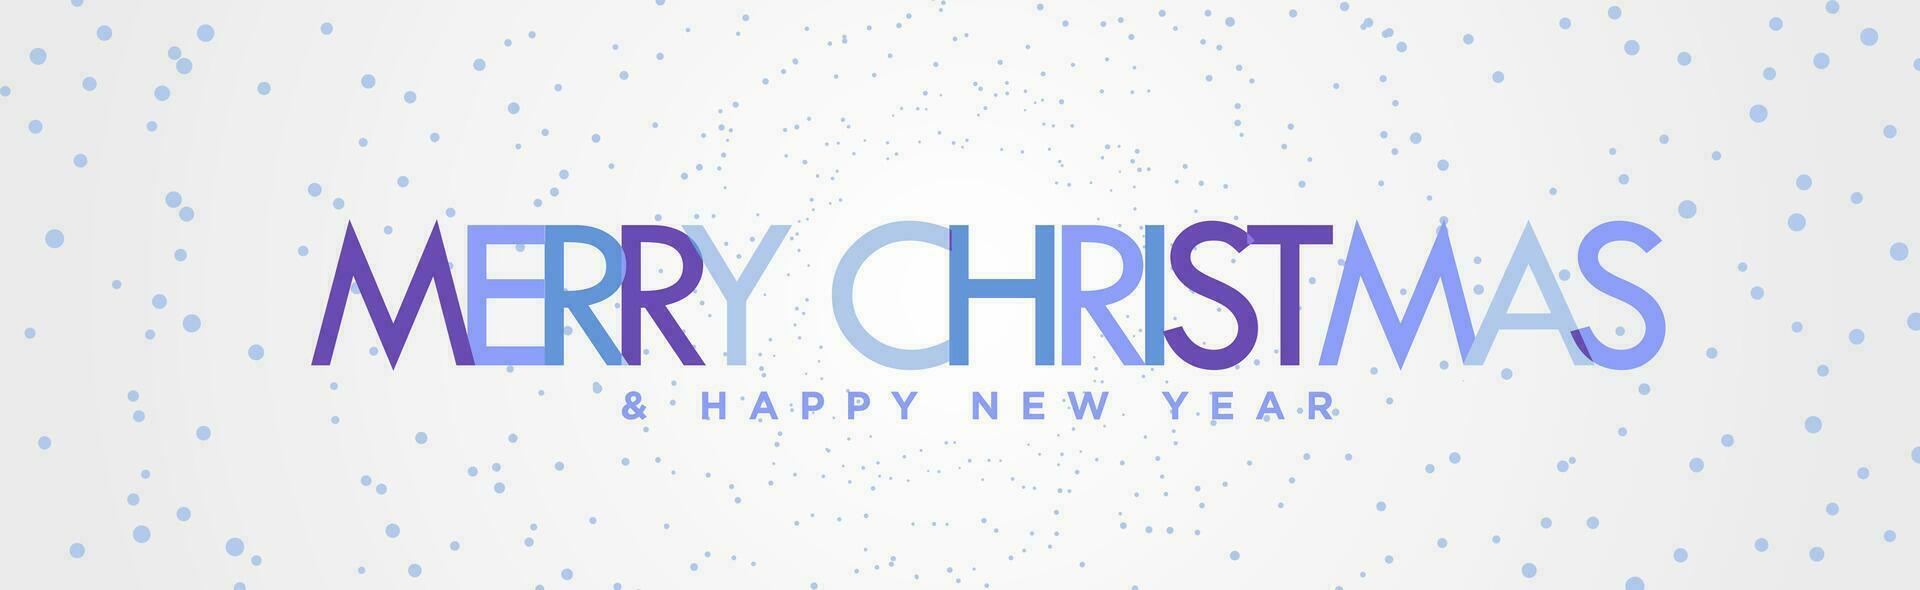 Minimal Merry Christmas and Happy New Year Typographic Banner. Teal blue snowdrops with 2022 mark on top and white background. Simple Merry Christmas Text header. Vector Illustration. EPS 10.